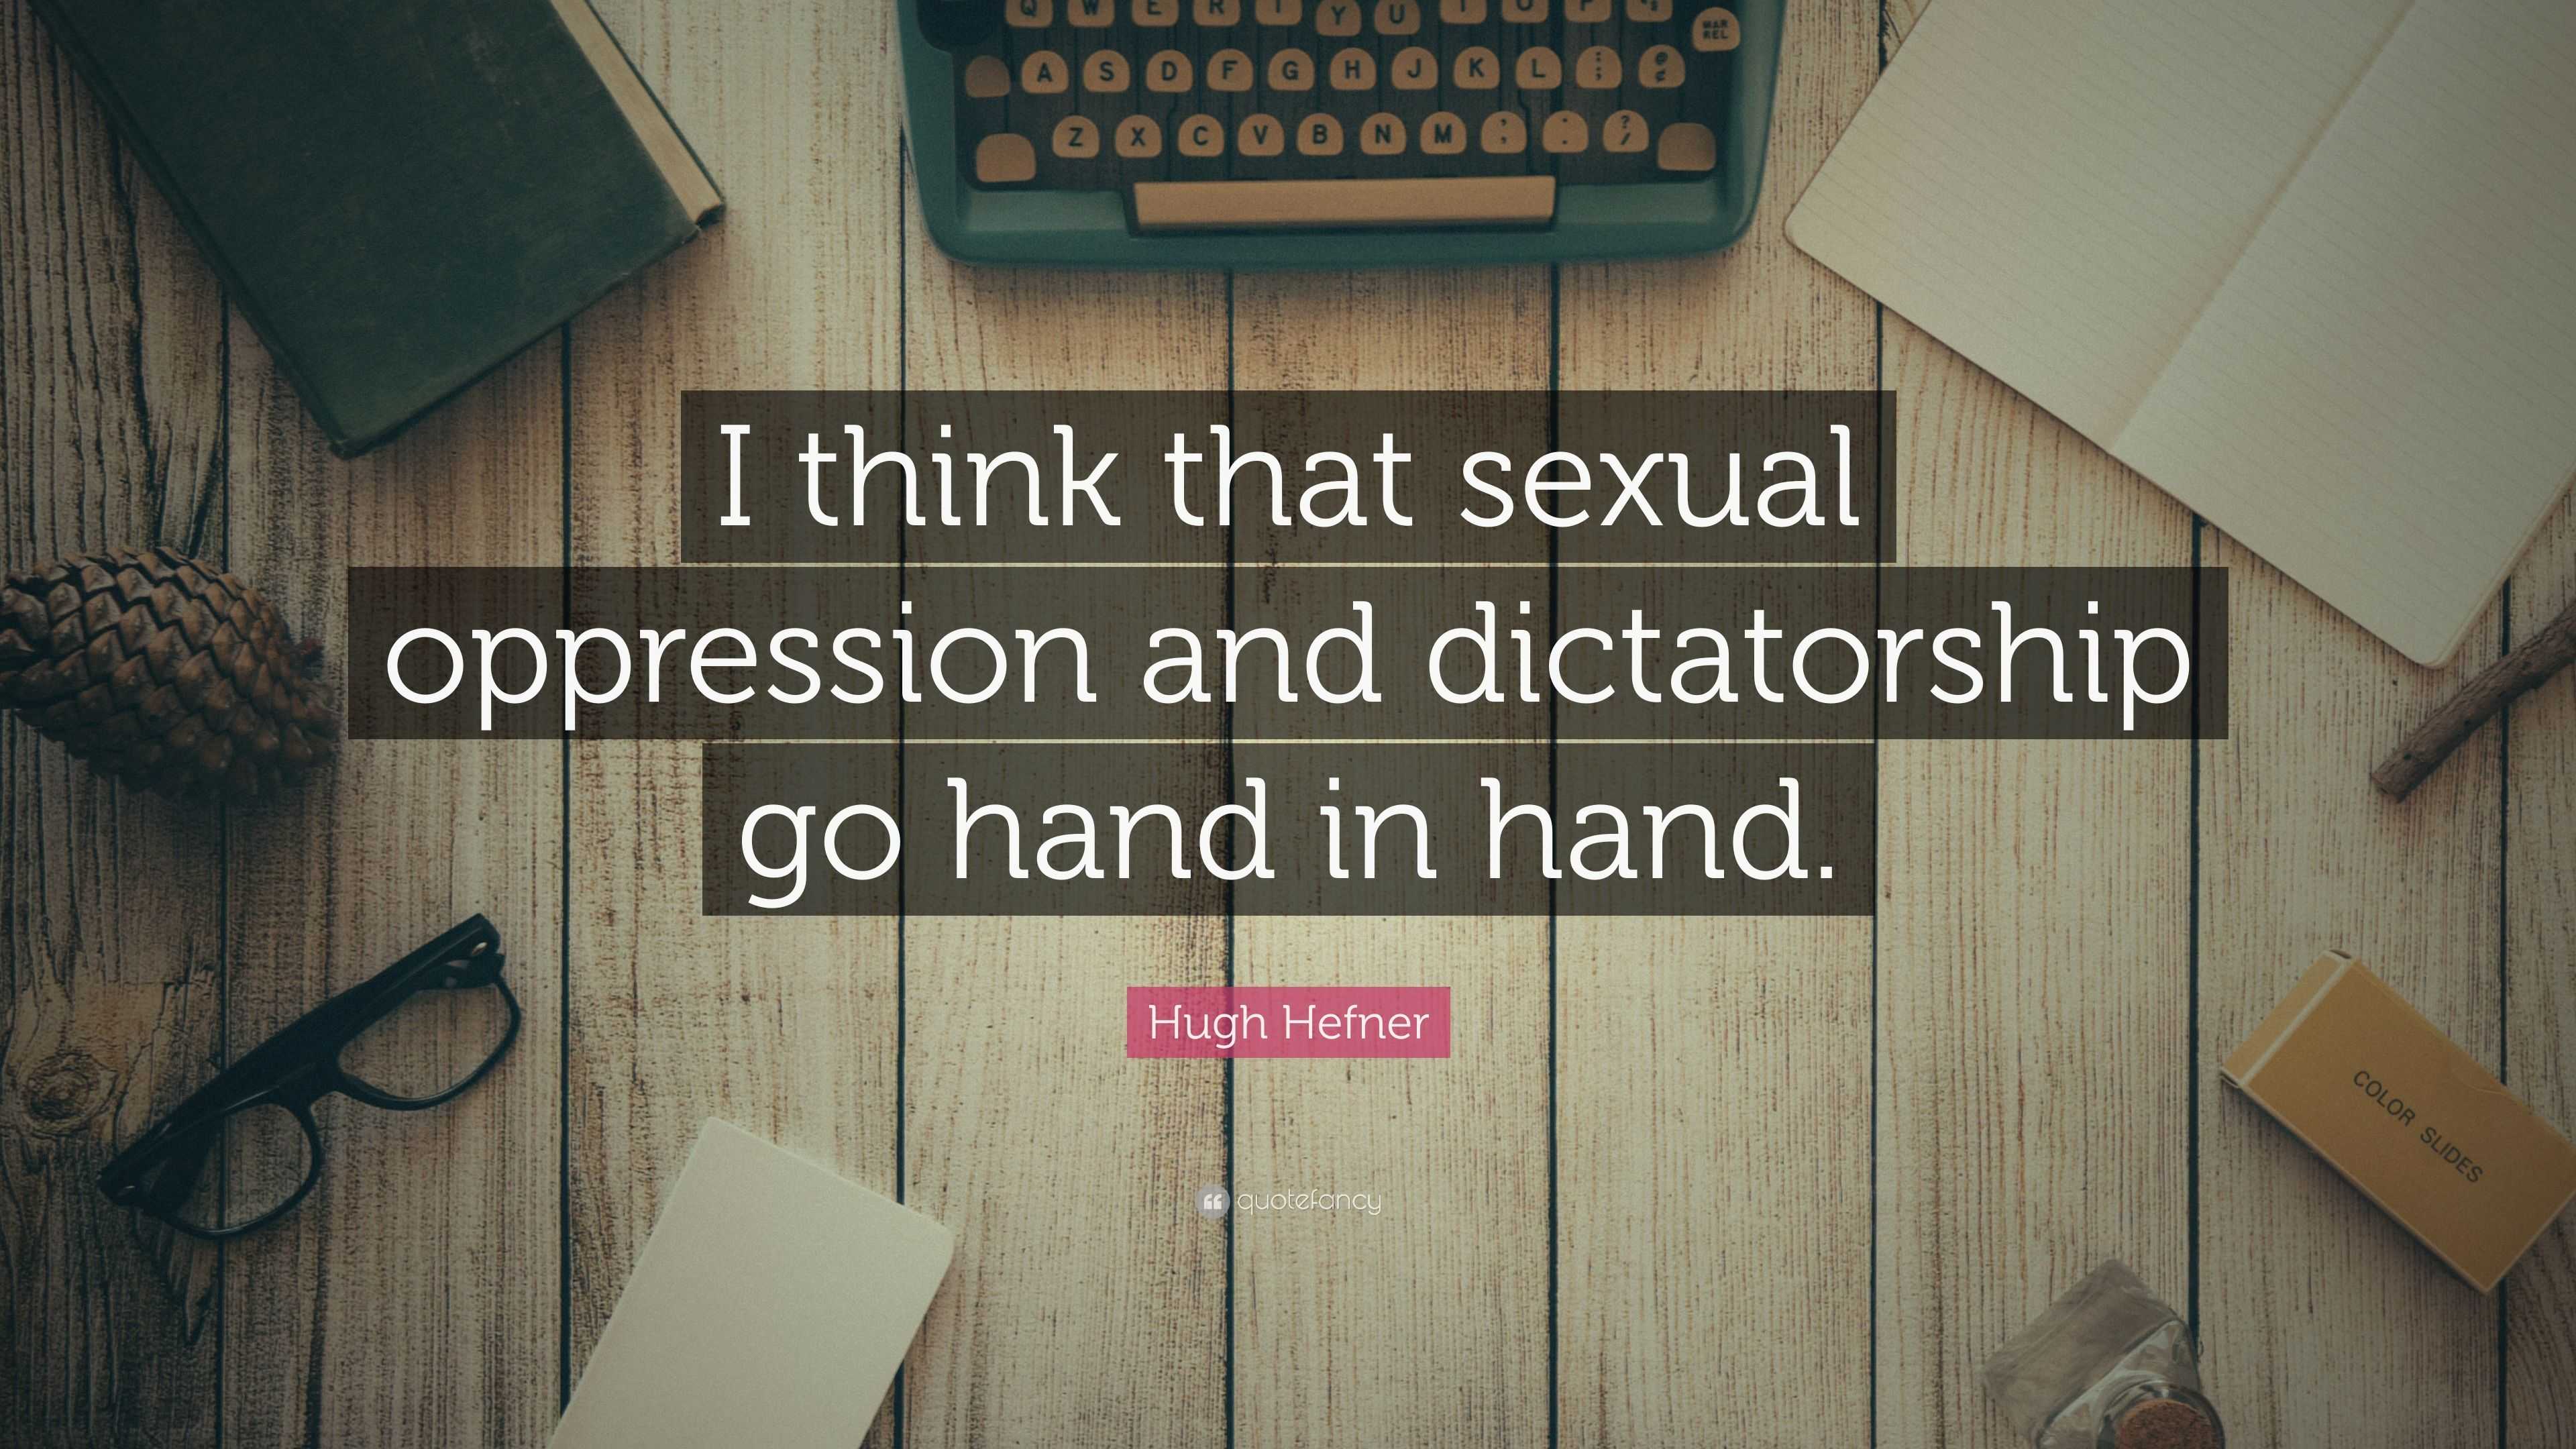 Hugh Hefner Quote “i Think That Sexual Oppression And Dictatorship Go Hand In Hand”